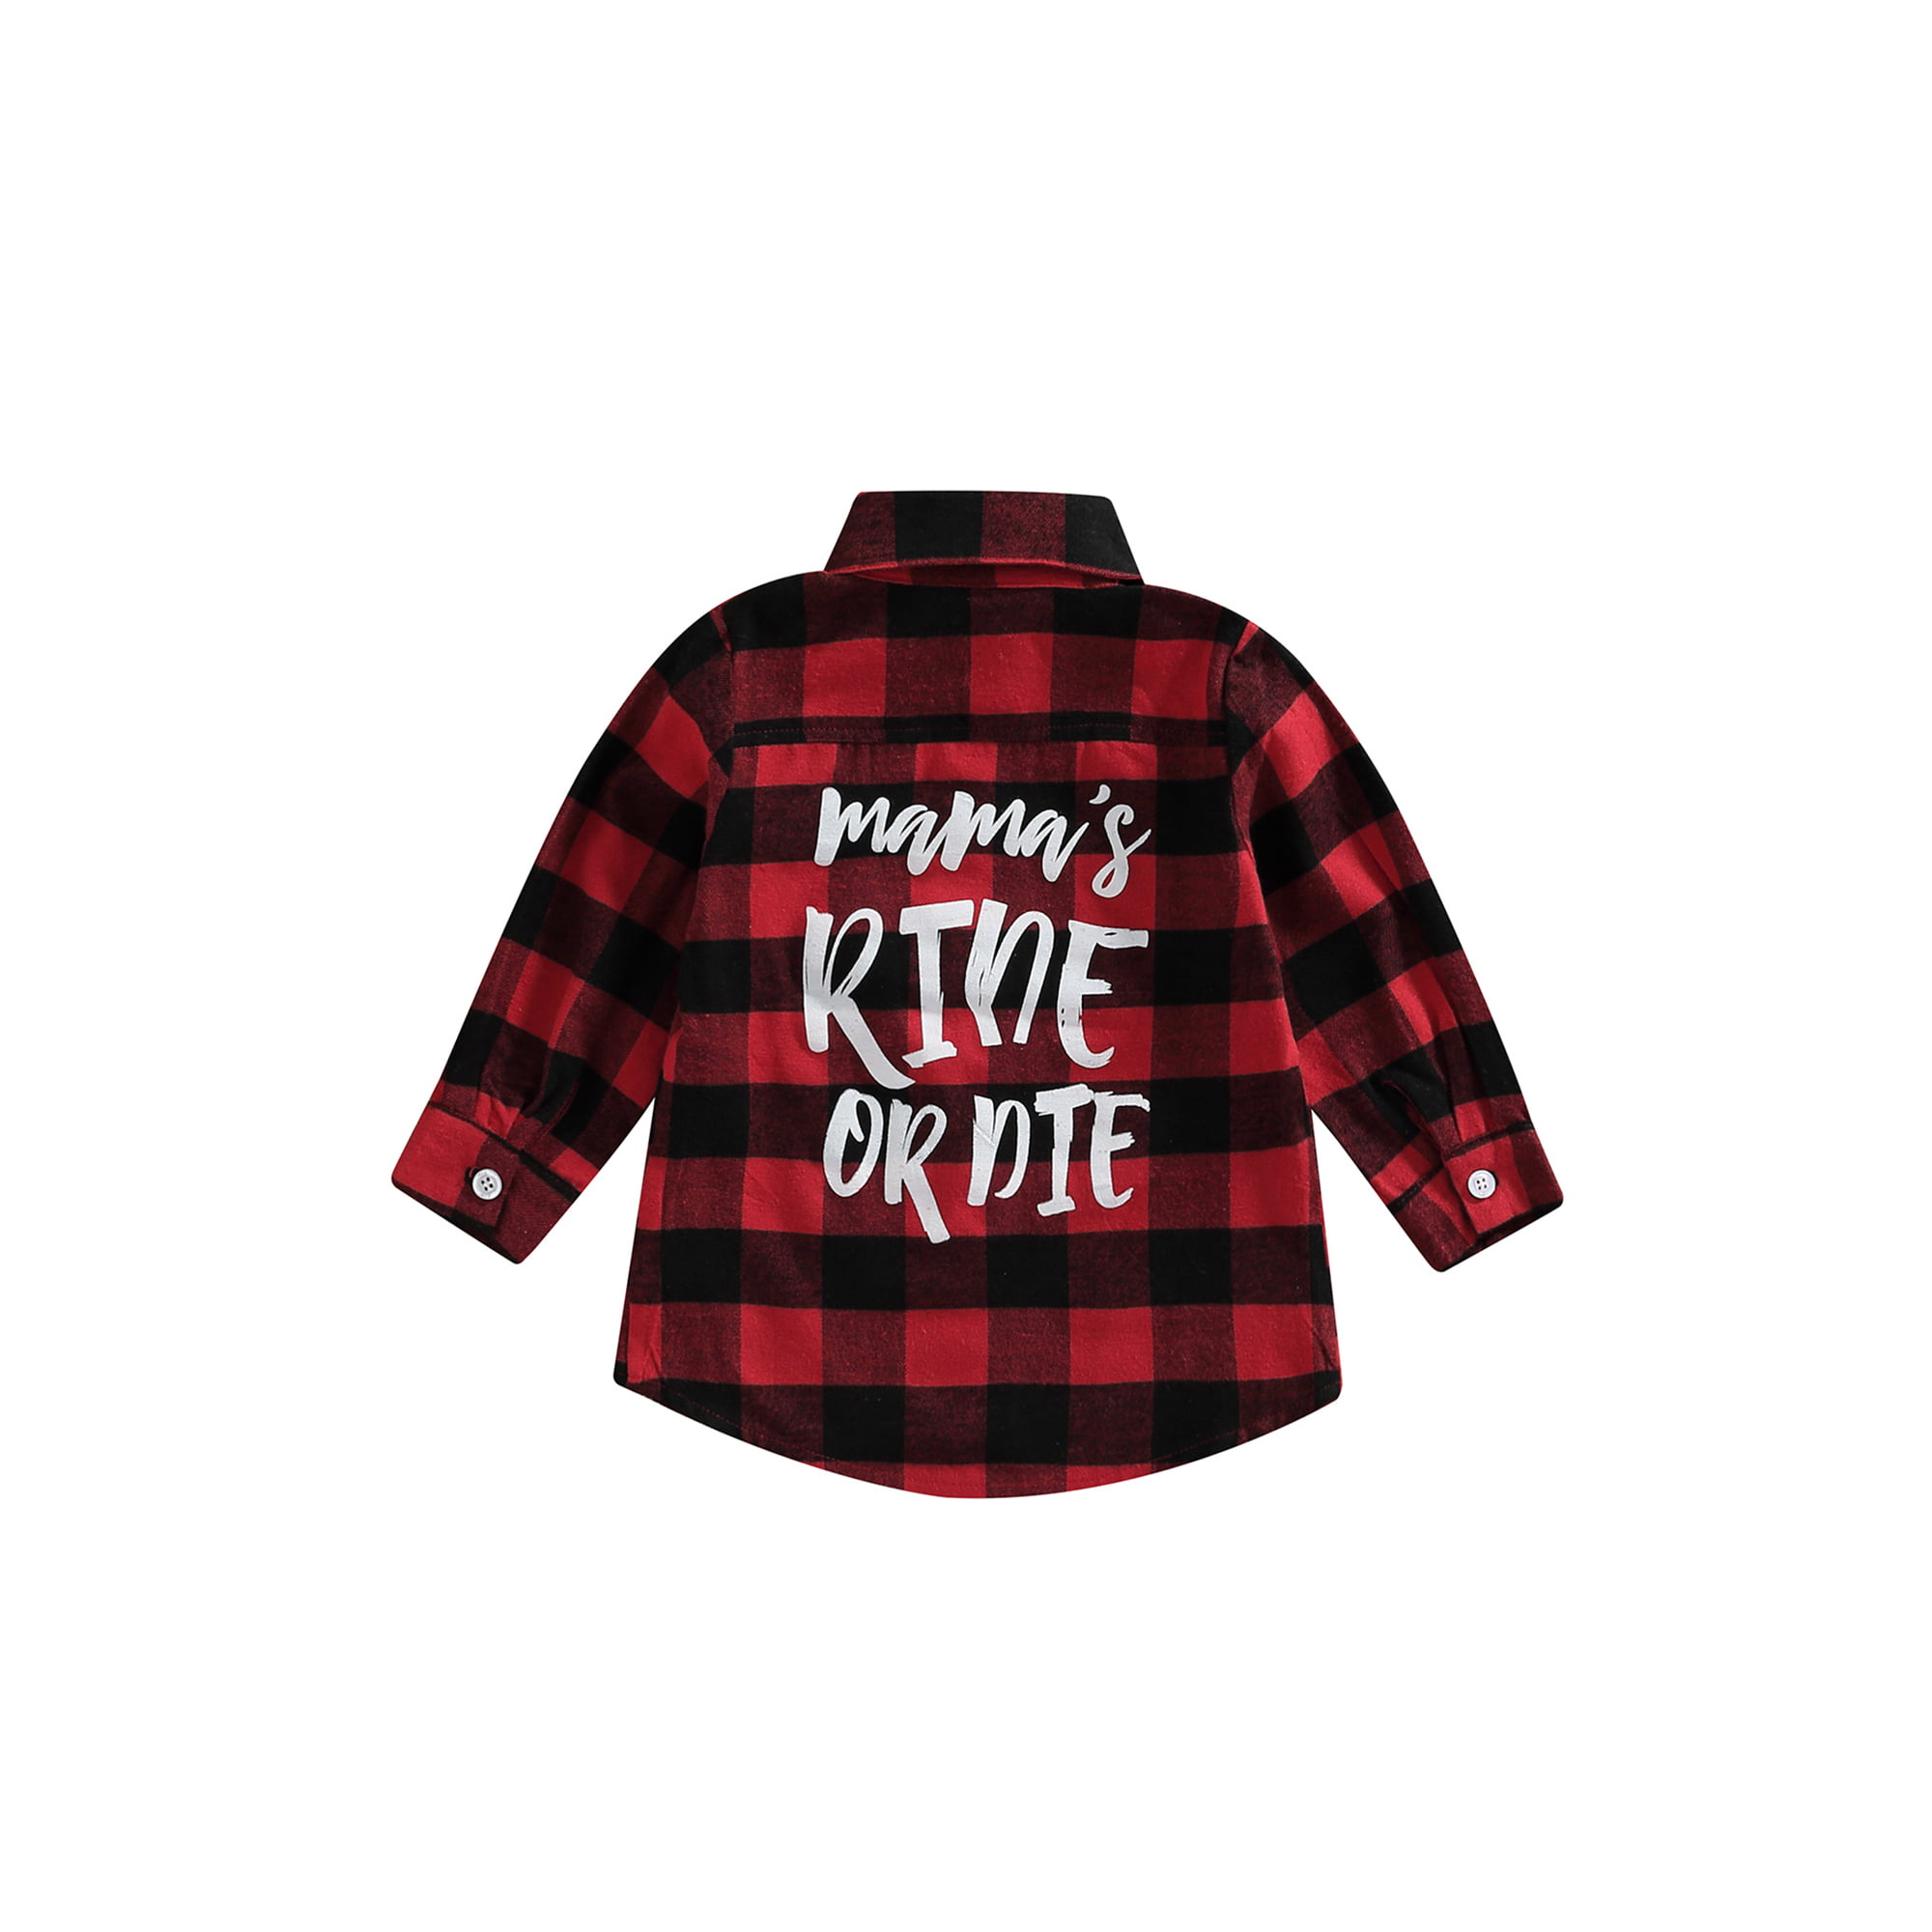 Jkerther Kids Little Boys Girls Baby Letters Print Long Sleeve Button Down Red Plaid Shirt, Infant Unisex, Size: 3-4 Years